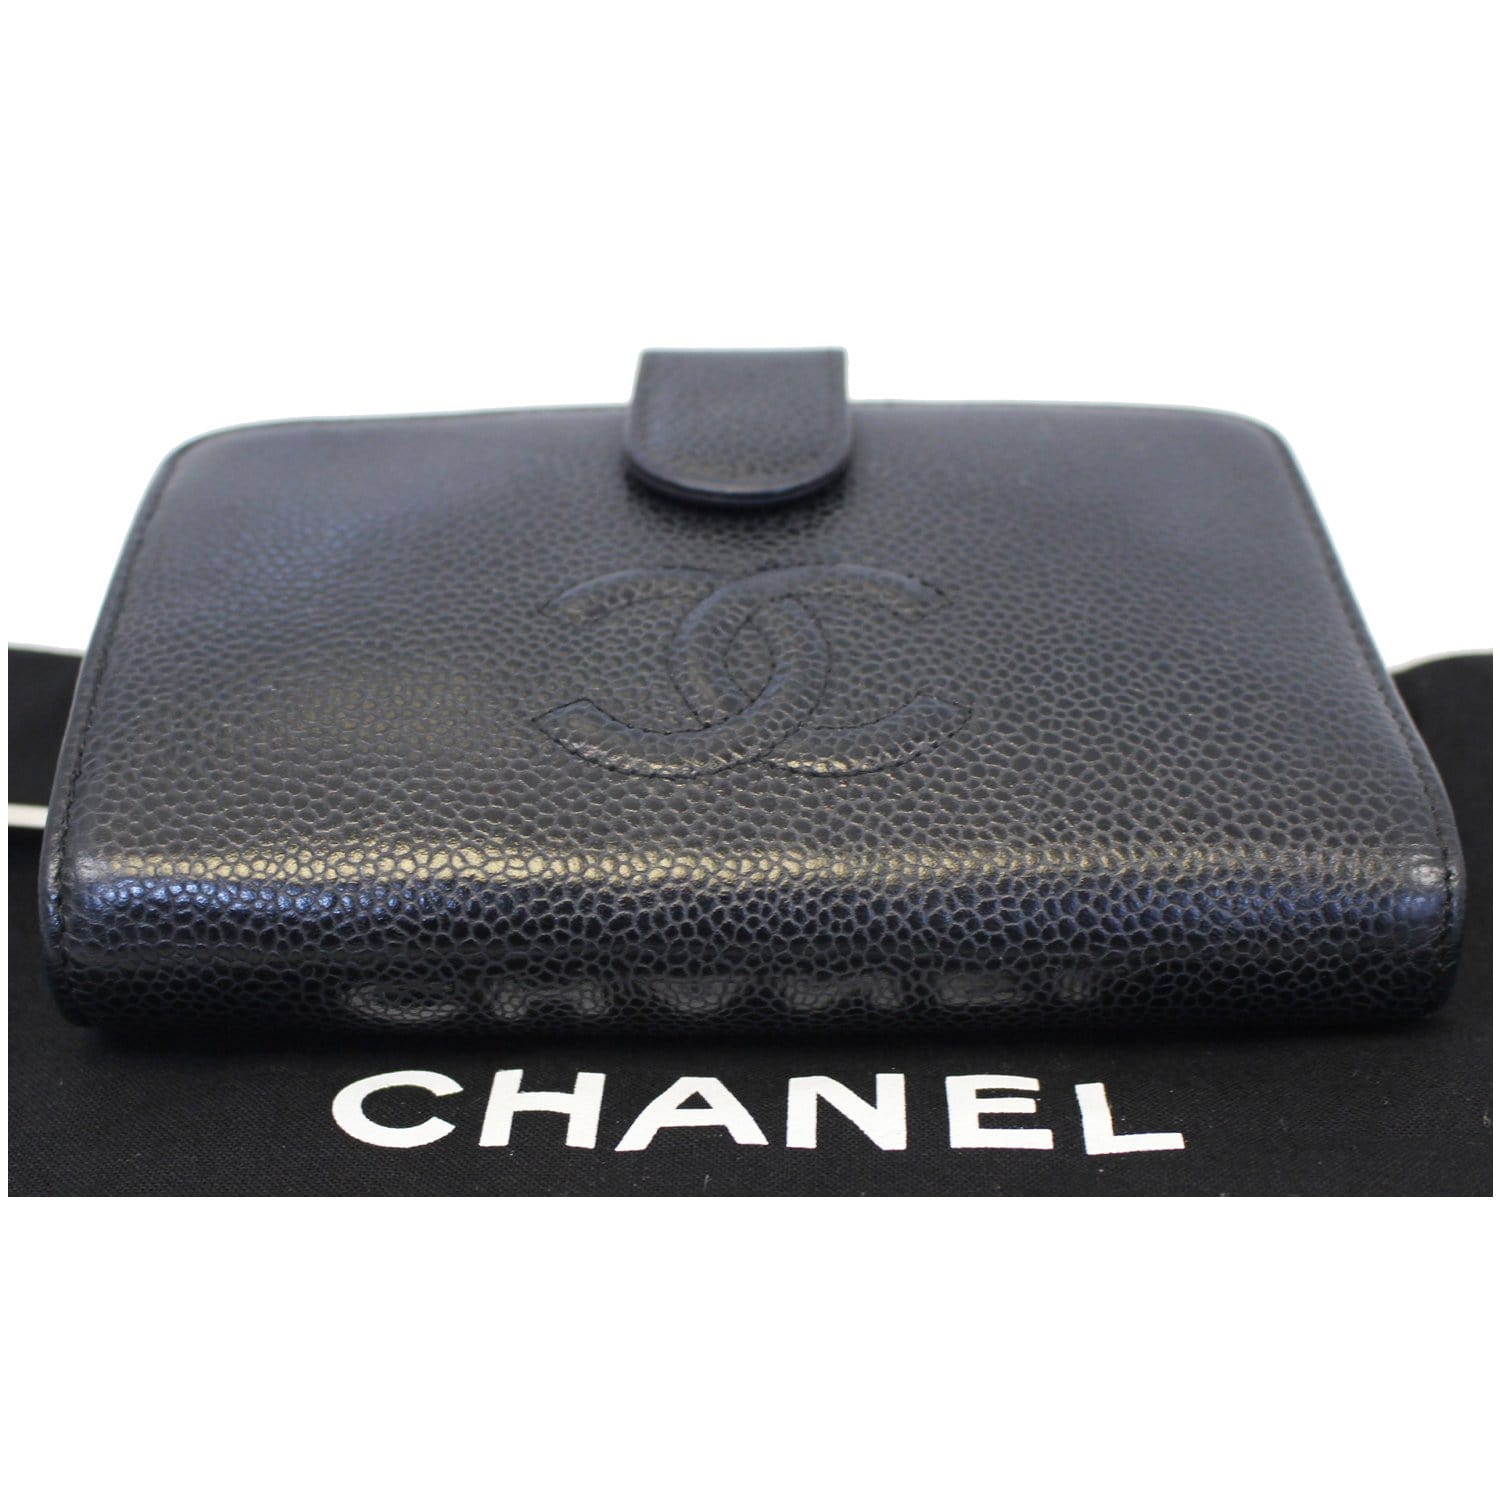 Chanel Black Quilted Caviar Leather Bifold Men's Wallet 667cas618